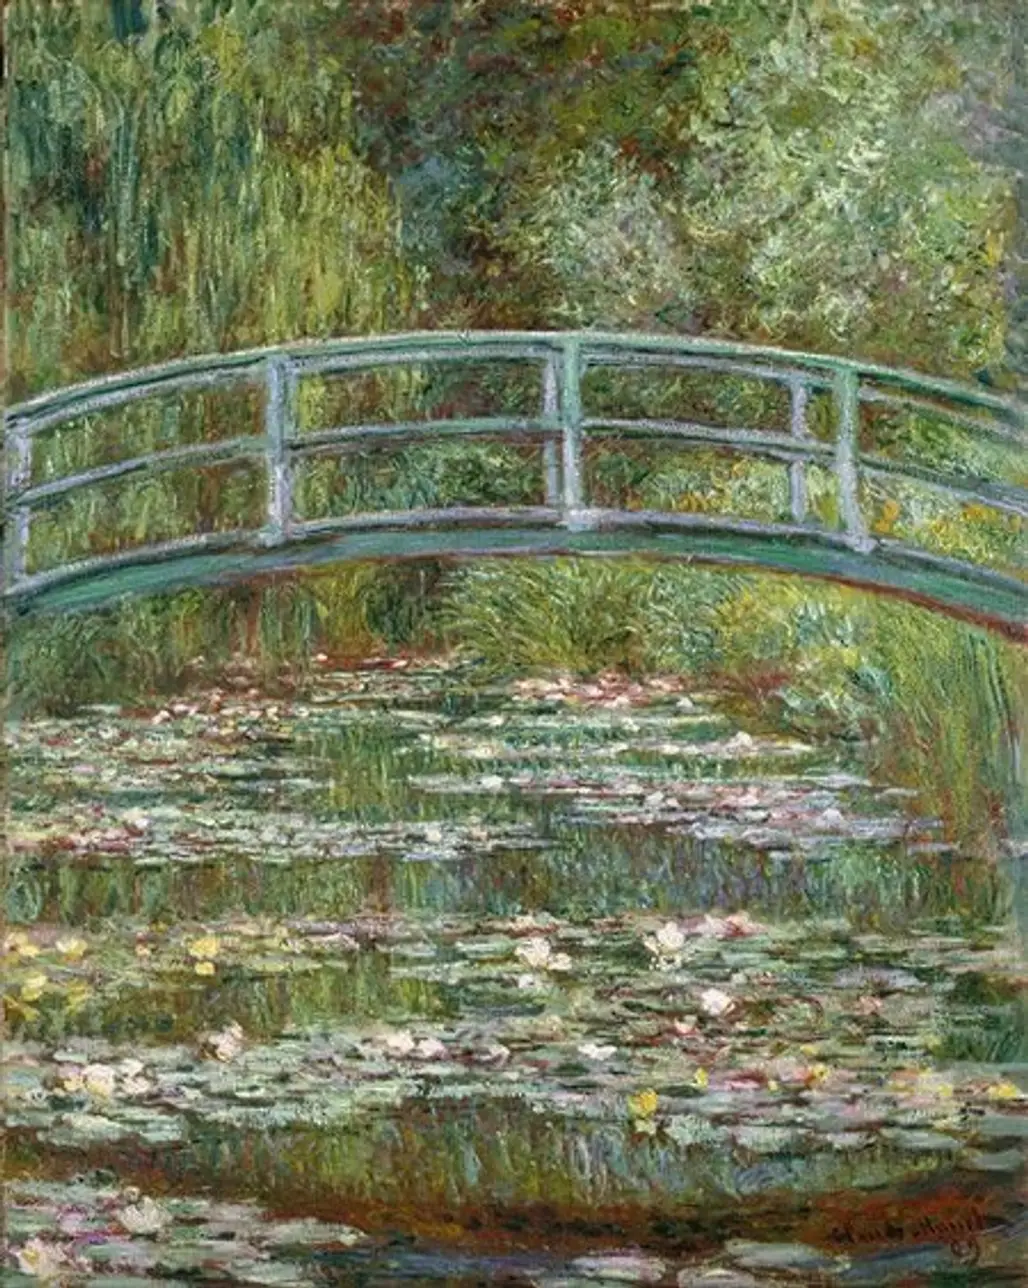 The Garden at Giverny - Monet